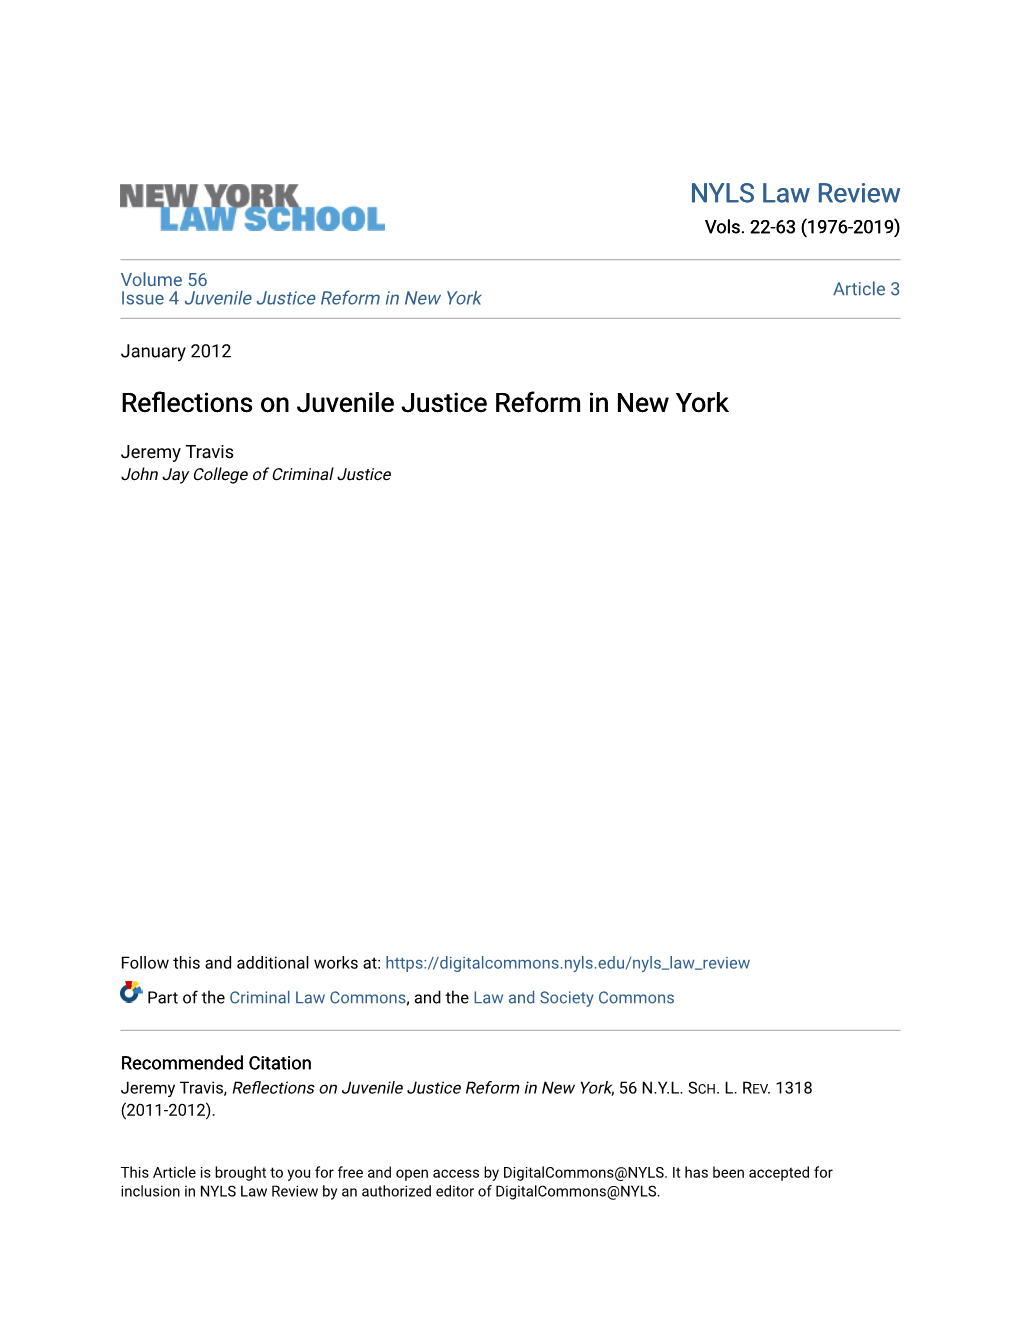 Reflections on Juvenile Justice Reform in New York